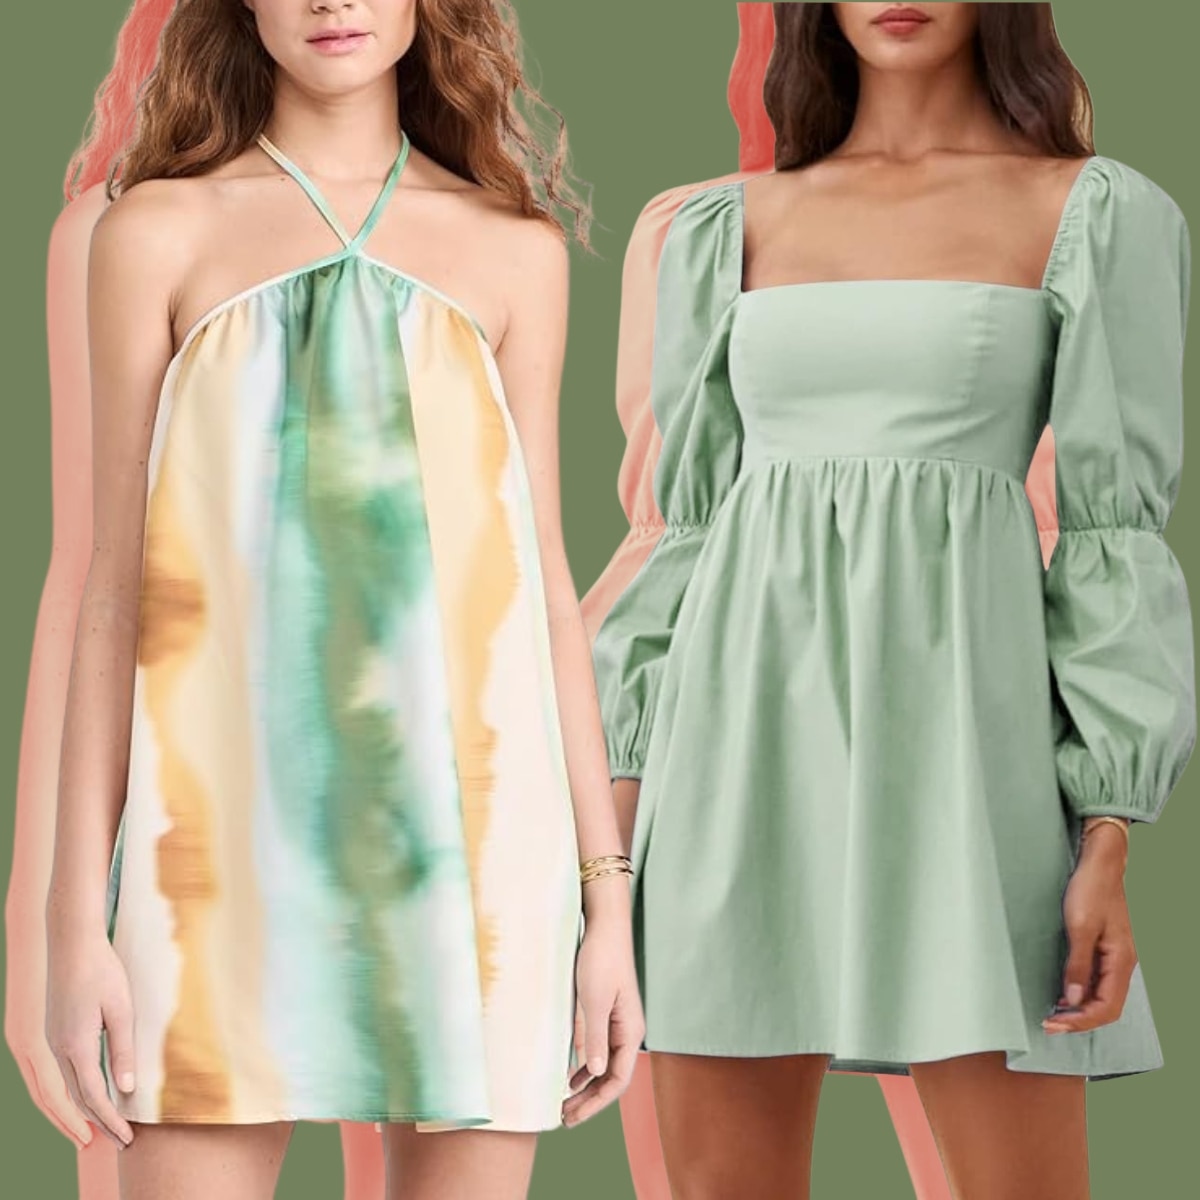 Trendy & Affordable Dresses From Amazon That’re Perfect for Summer